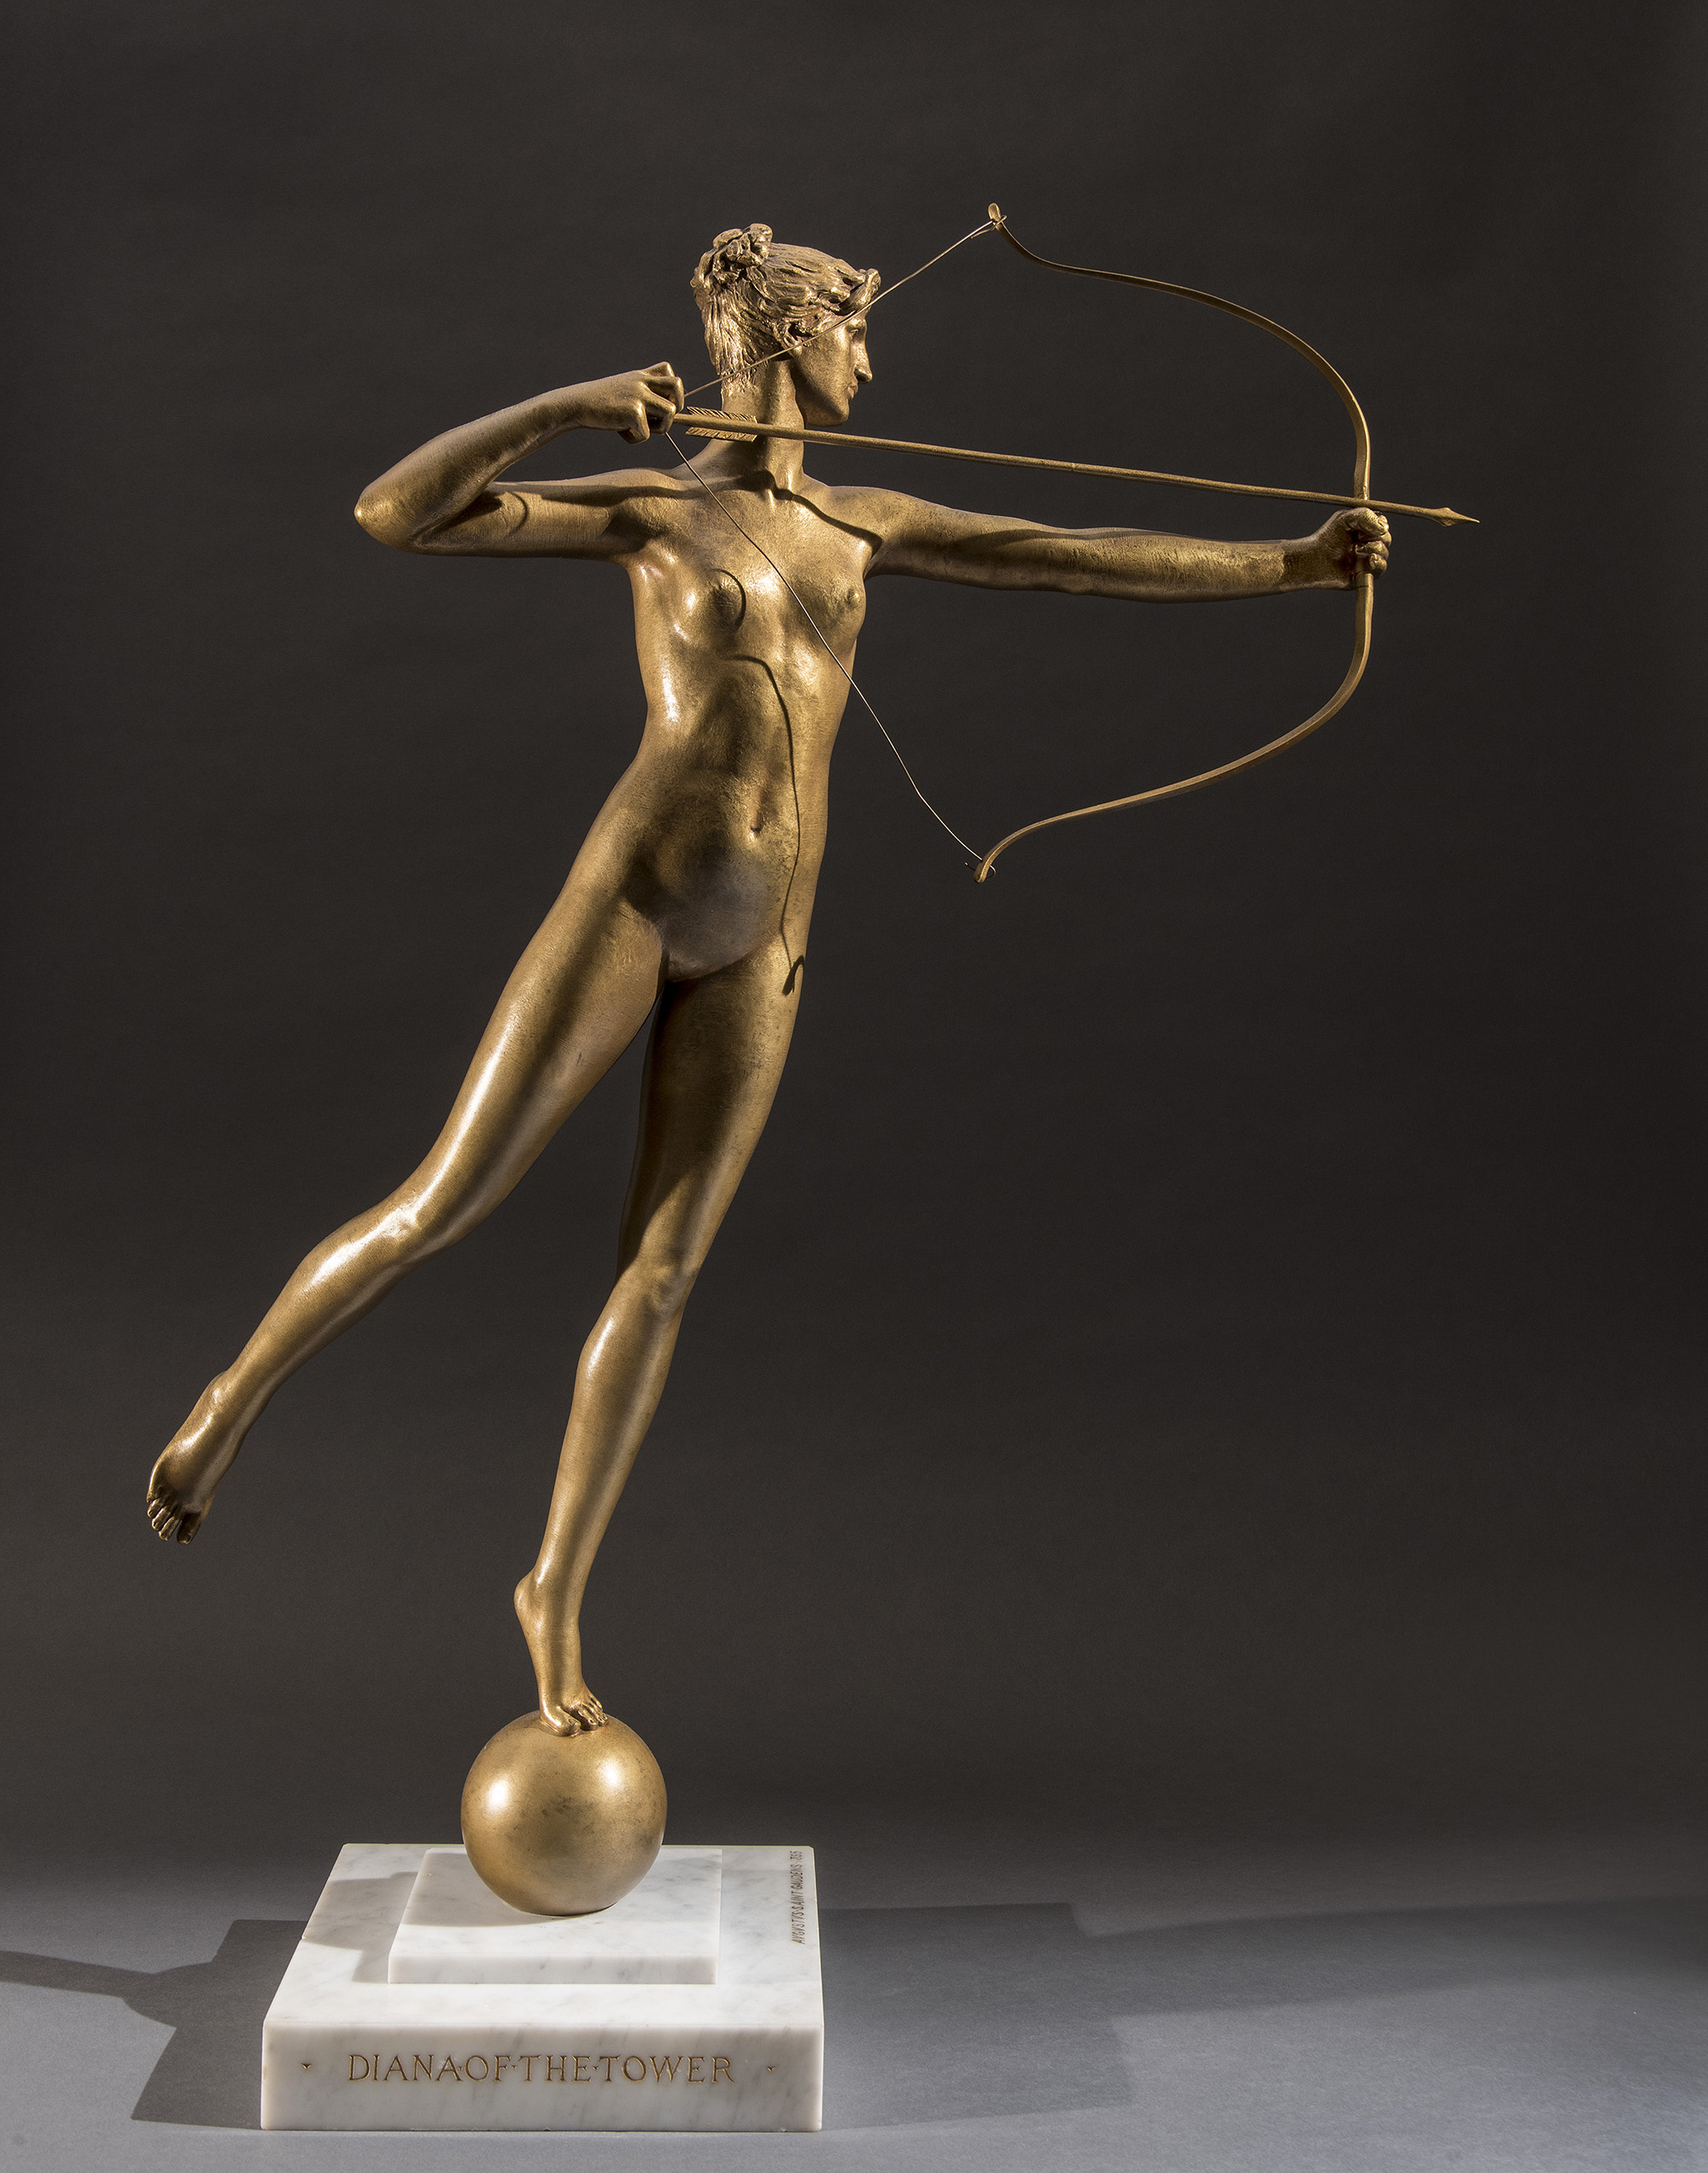 

											American Figurative  </b>

											<em>
												Now on view in New York</em> 

											<h4>
																							</h4>

		                																																													<i>Augustus Saint Gaudens,</i>  
																																								Diana, ca. 1899, 
																																								Bronze with golden patination, 
																																								35 1/2 inches 
																								
		                				